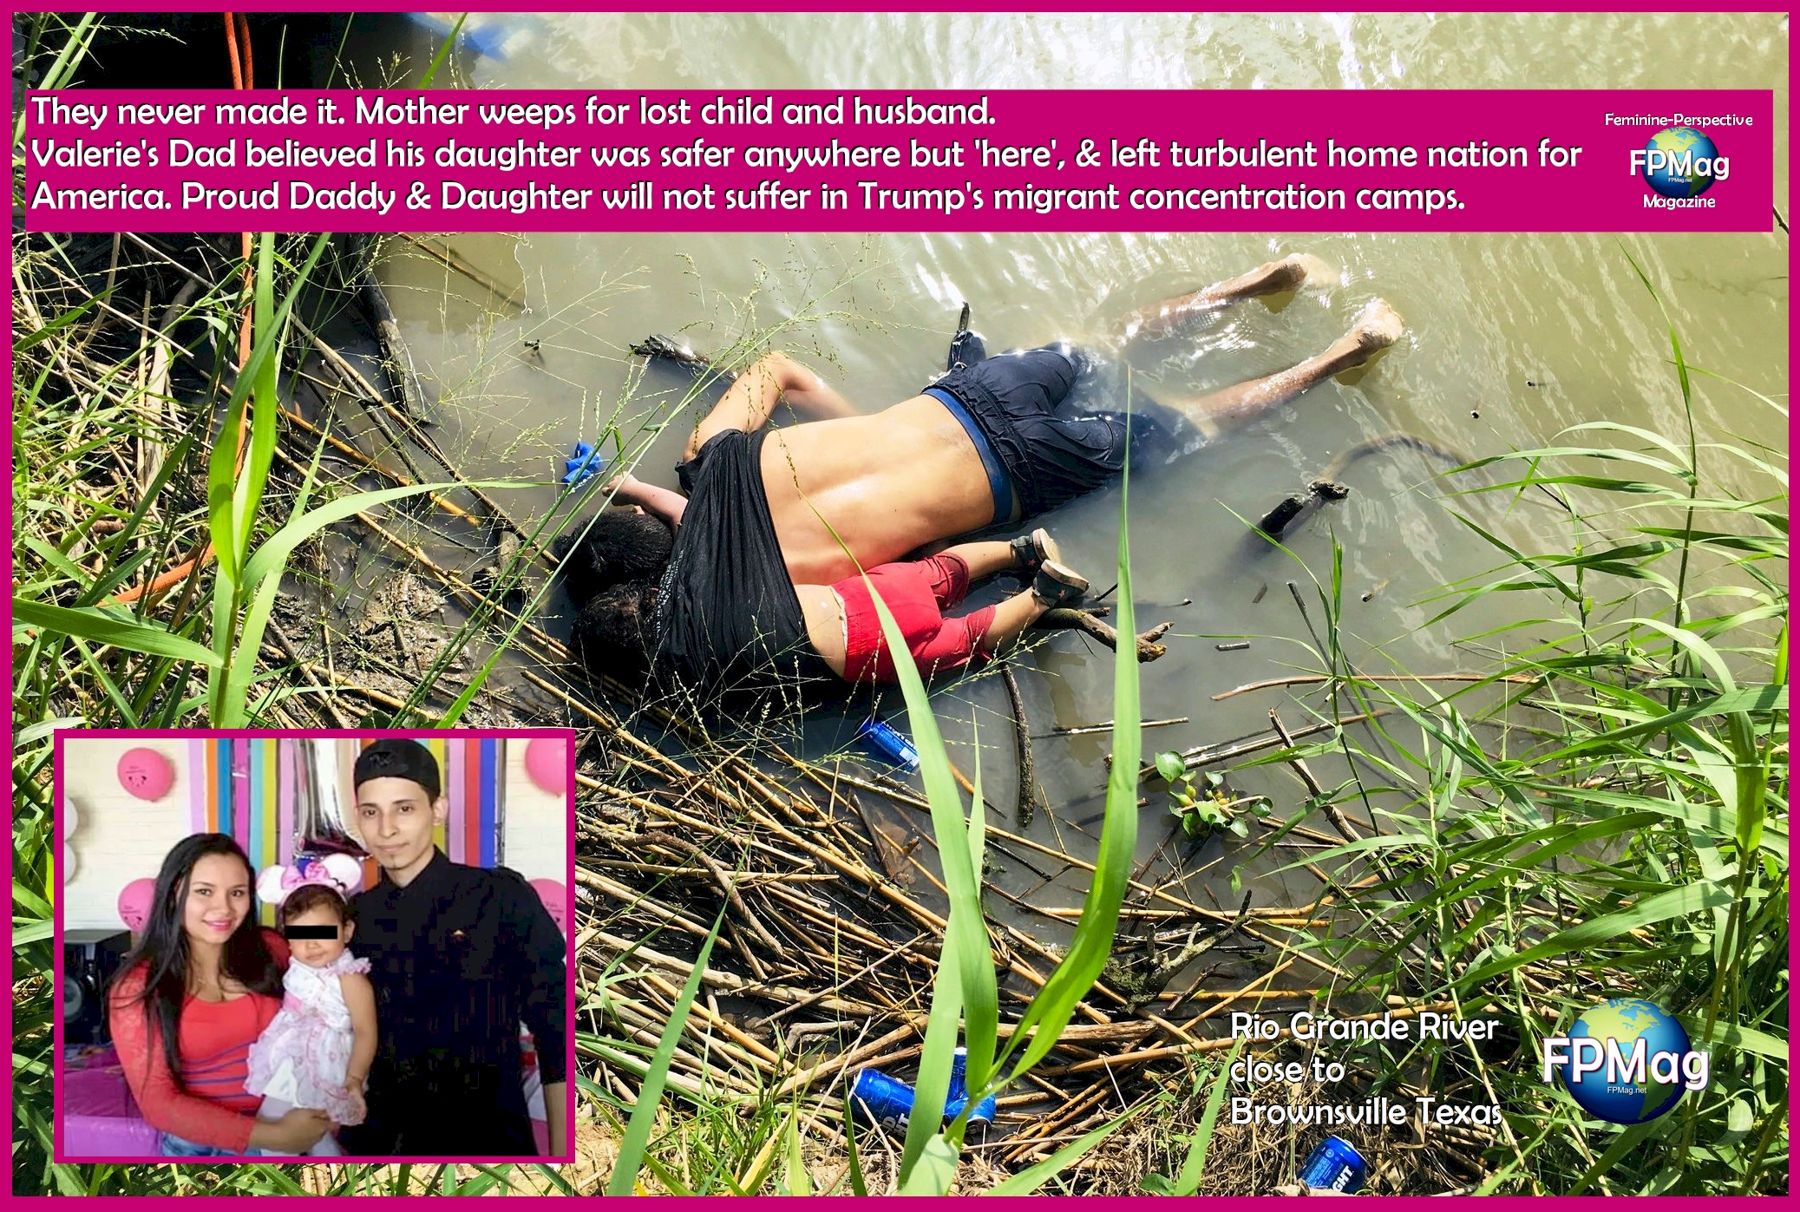 They never made it. Mother weeps for lost child and husband. Valerie's Dad believed his daughter was safer anywhere but 'here', & left turbulent home nation for America. Proud Daddy & Daughter will not suffer in Trump's migrant concentration camps. Feminine-Perspective Magazine